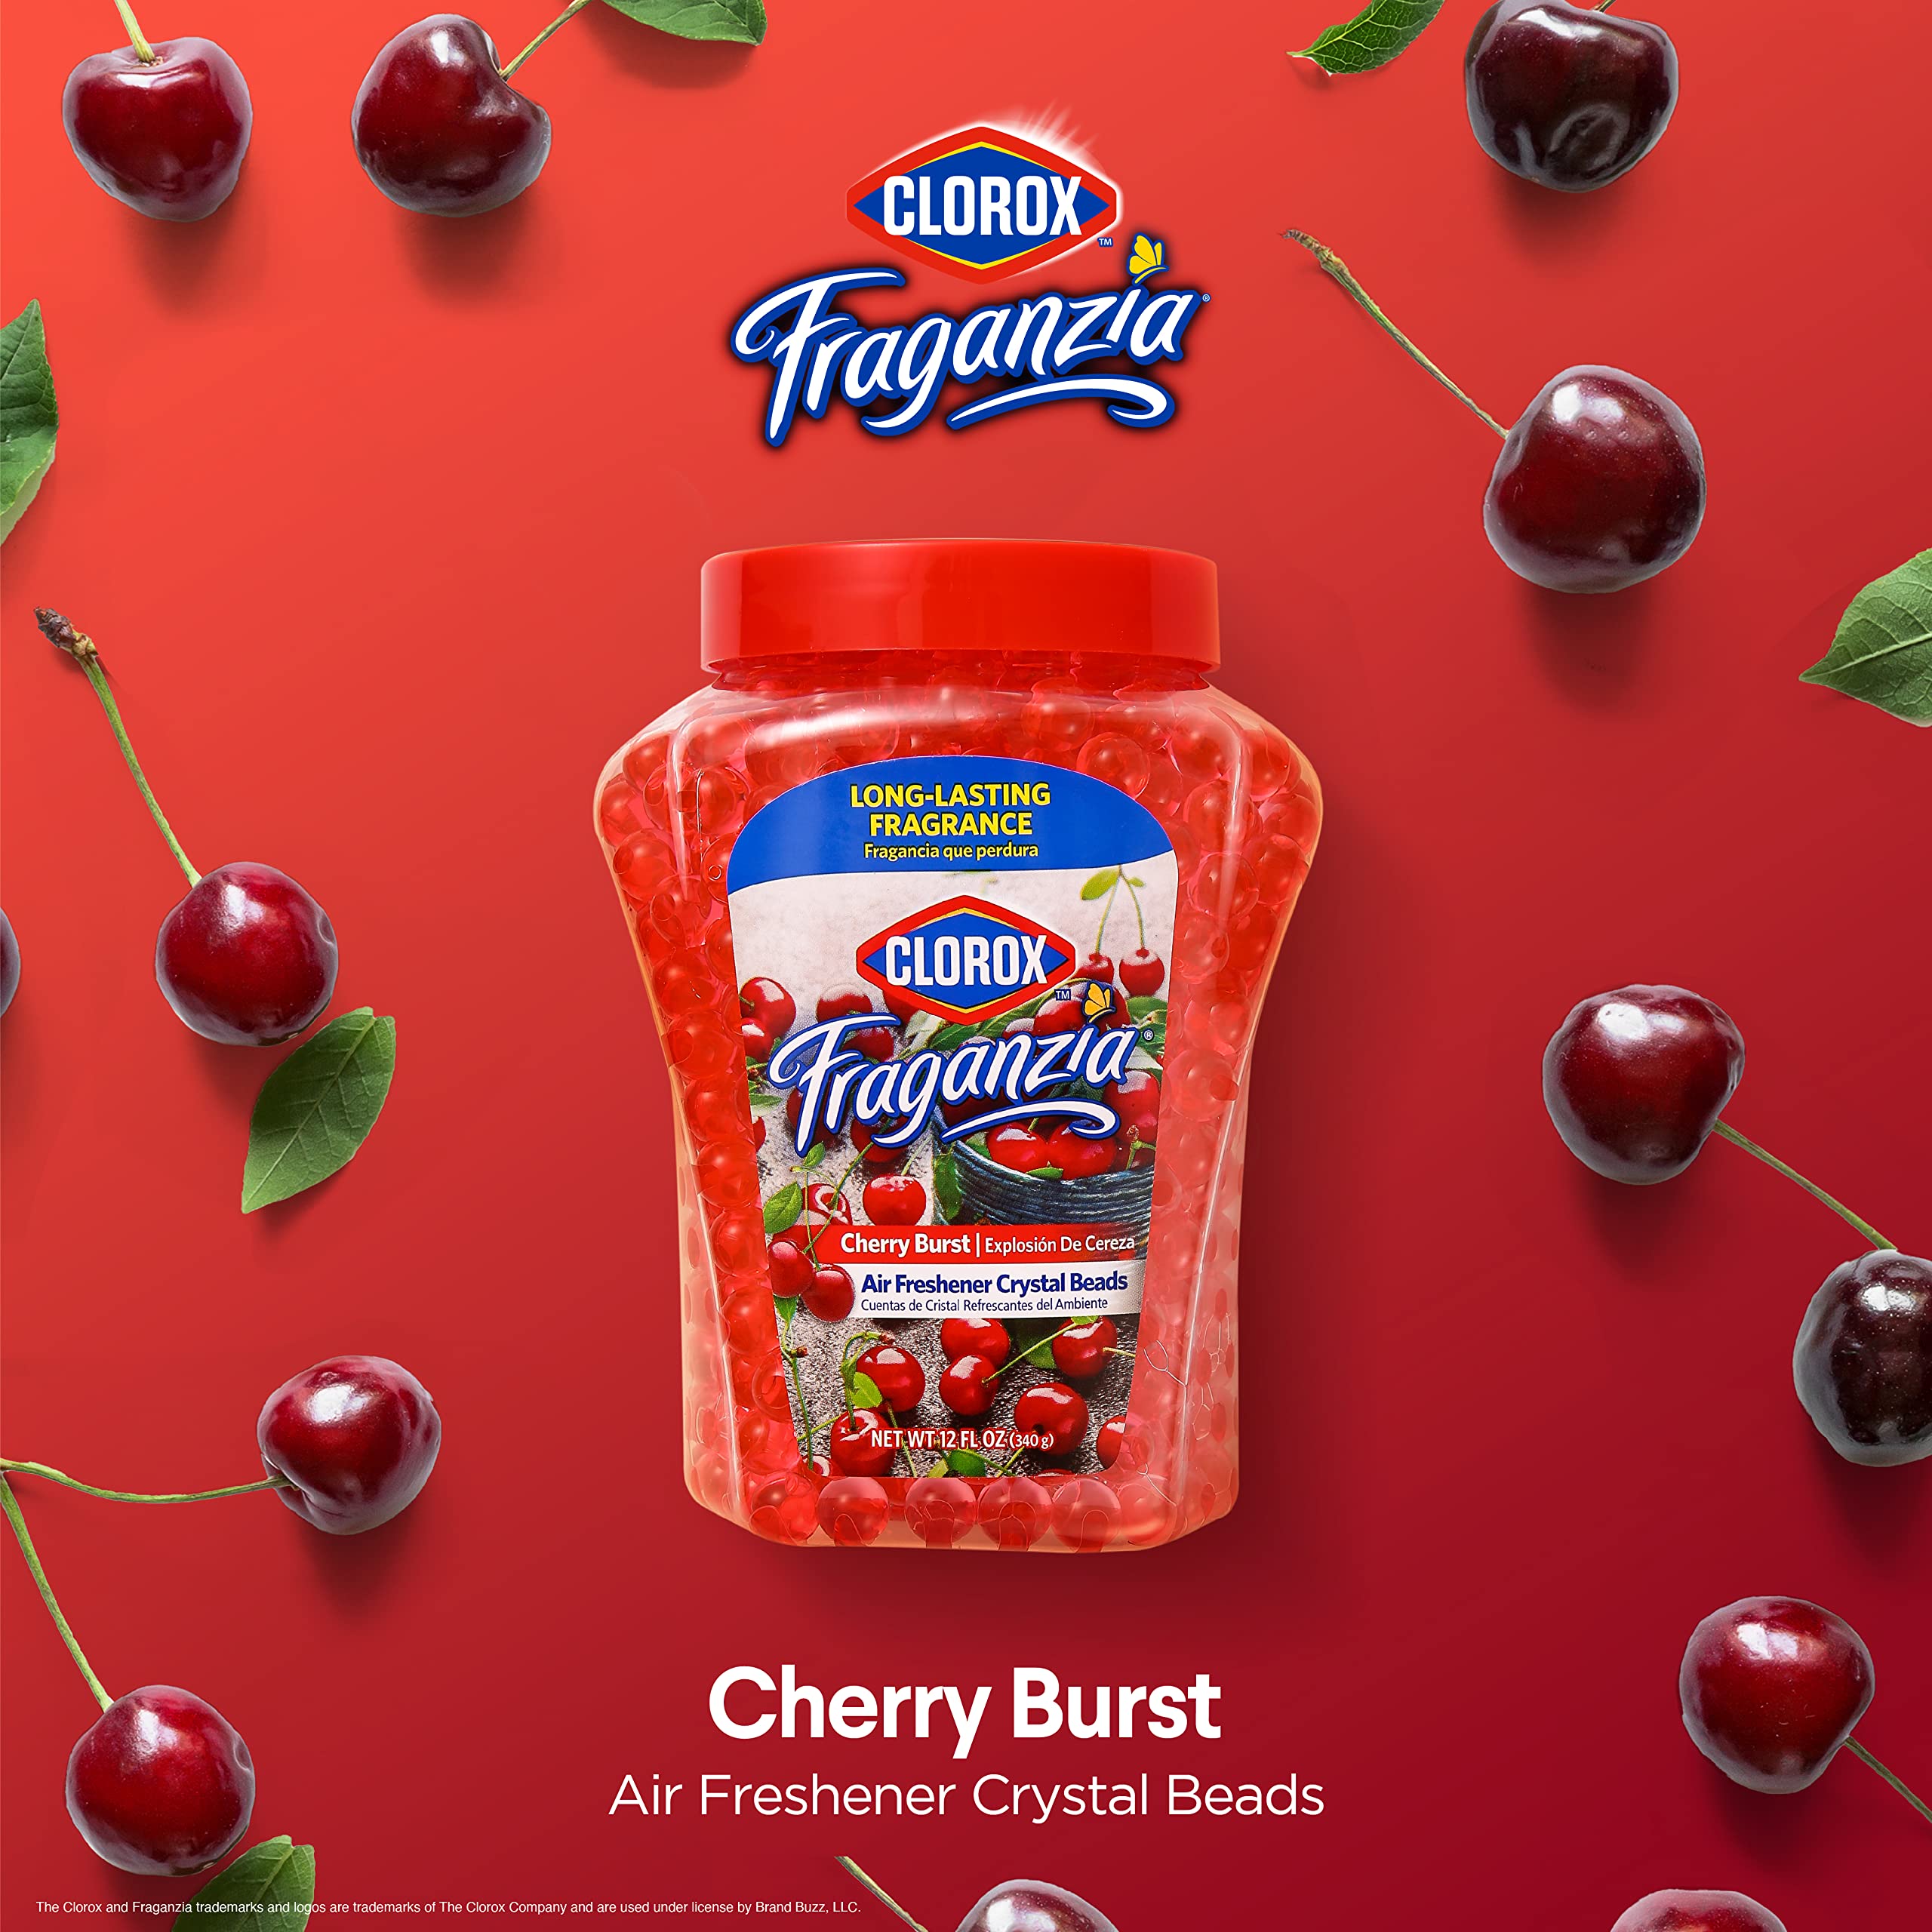 Clorox Fraganzia Air Care Air Freshener Crystal Beads in Cherry Burst Scent, 12 Ounces | Cherry Burst Scented Air Freshener Gel Beads from Clorox Fraganzia for Car or Home